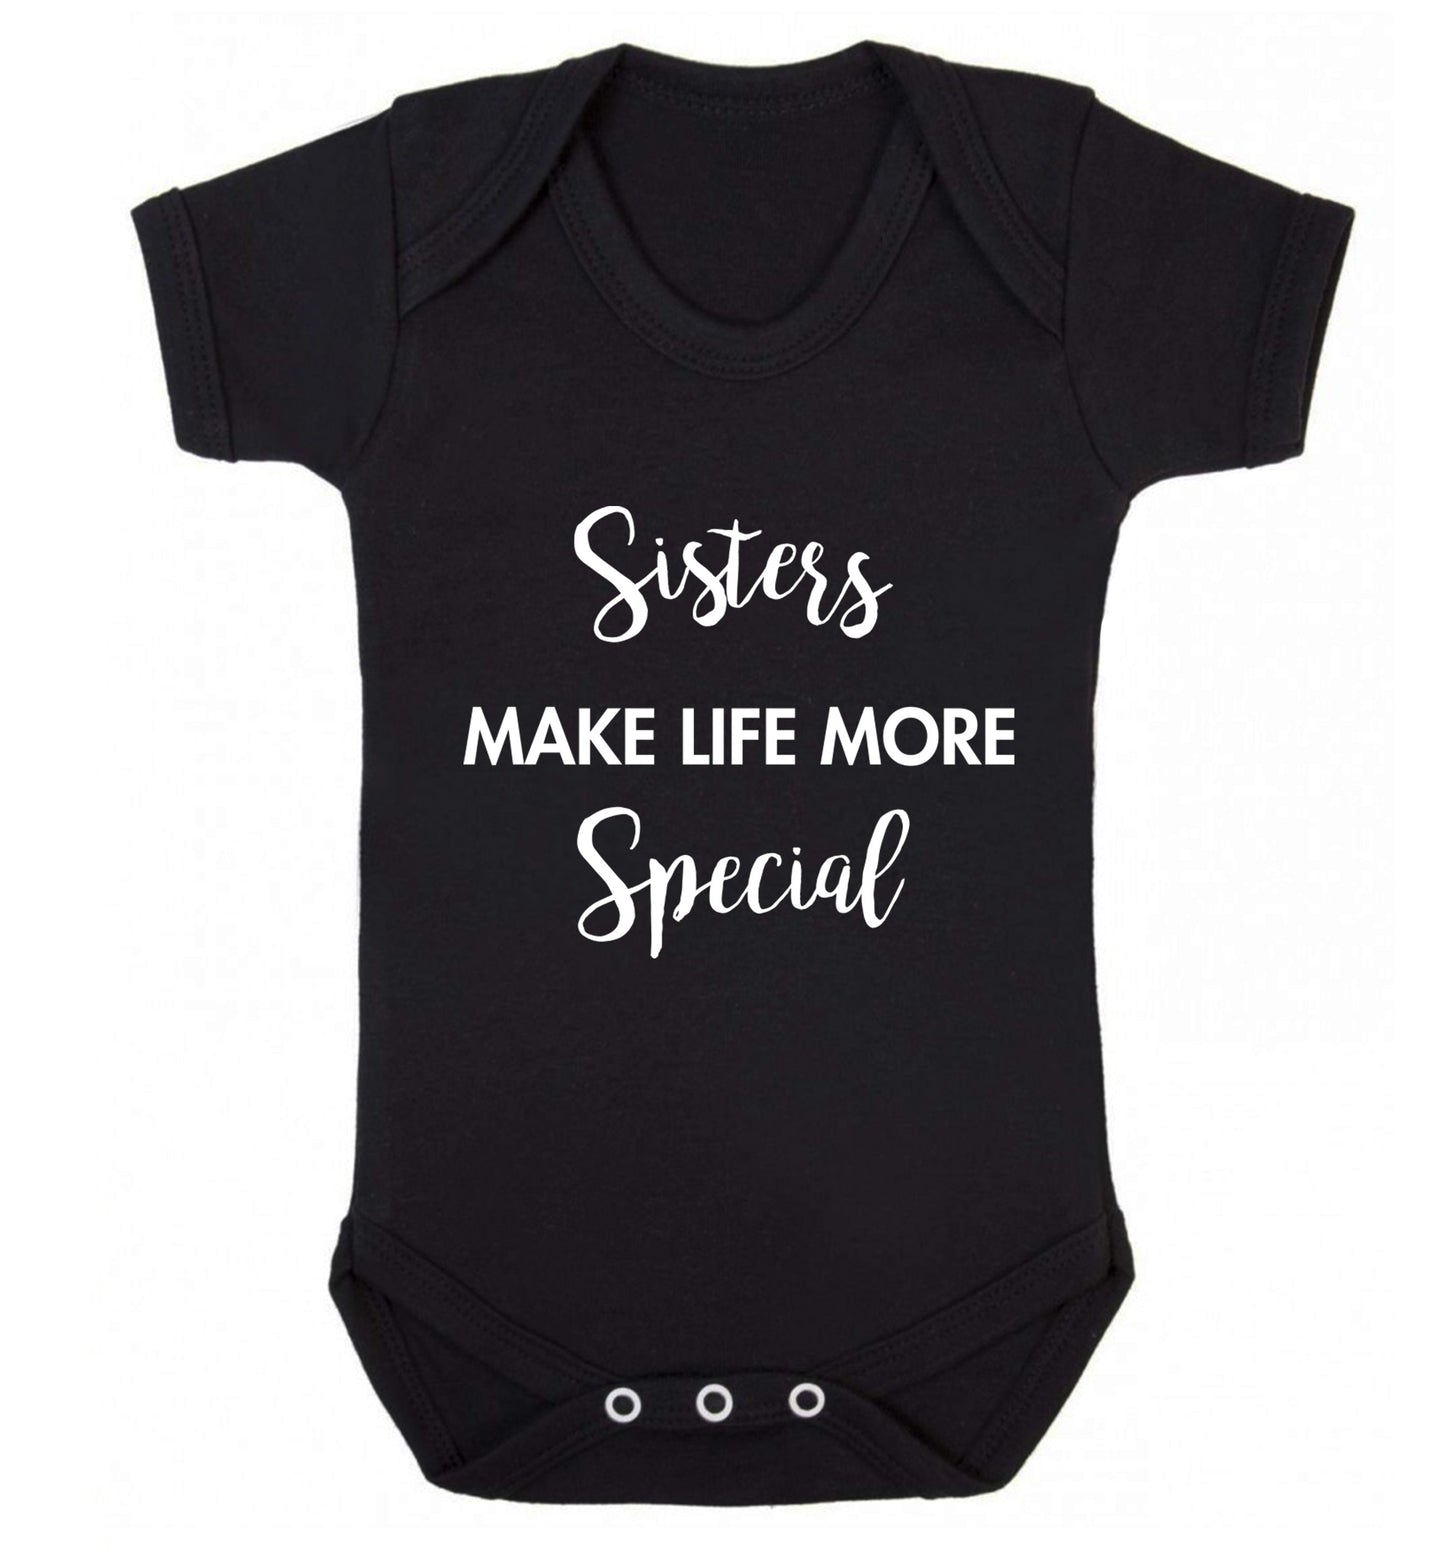 Sisters make life more special Baby Vest black 18-24 months